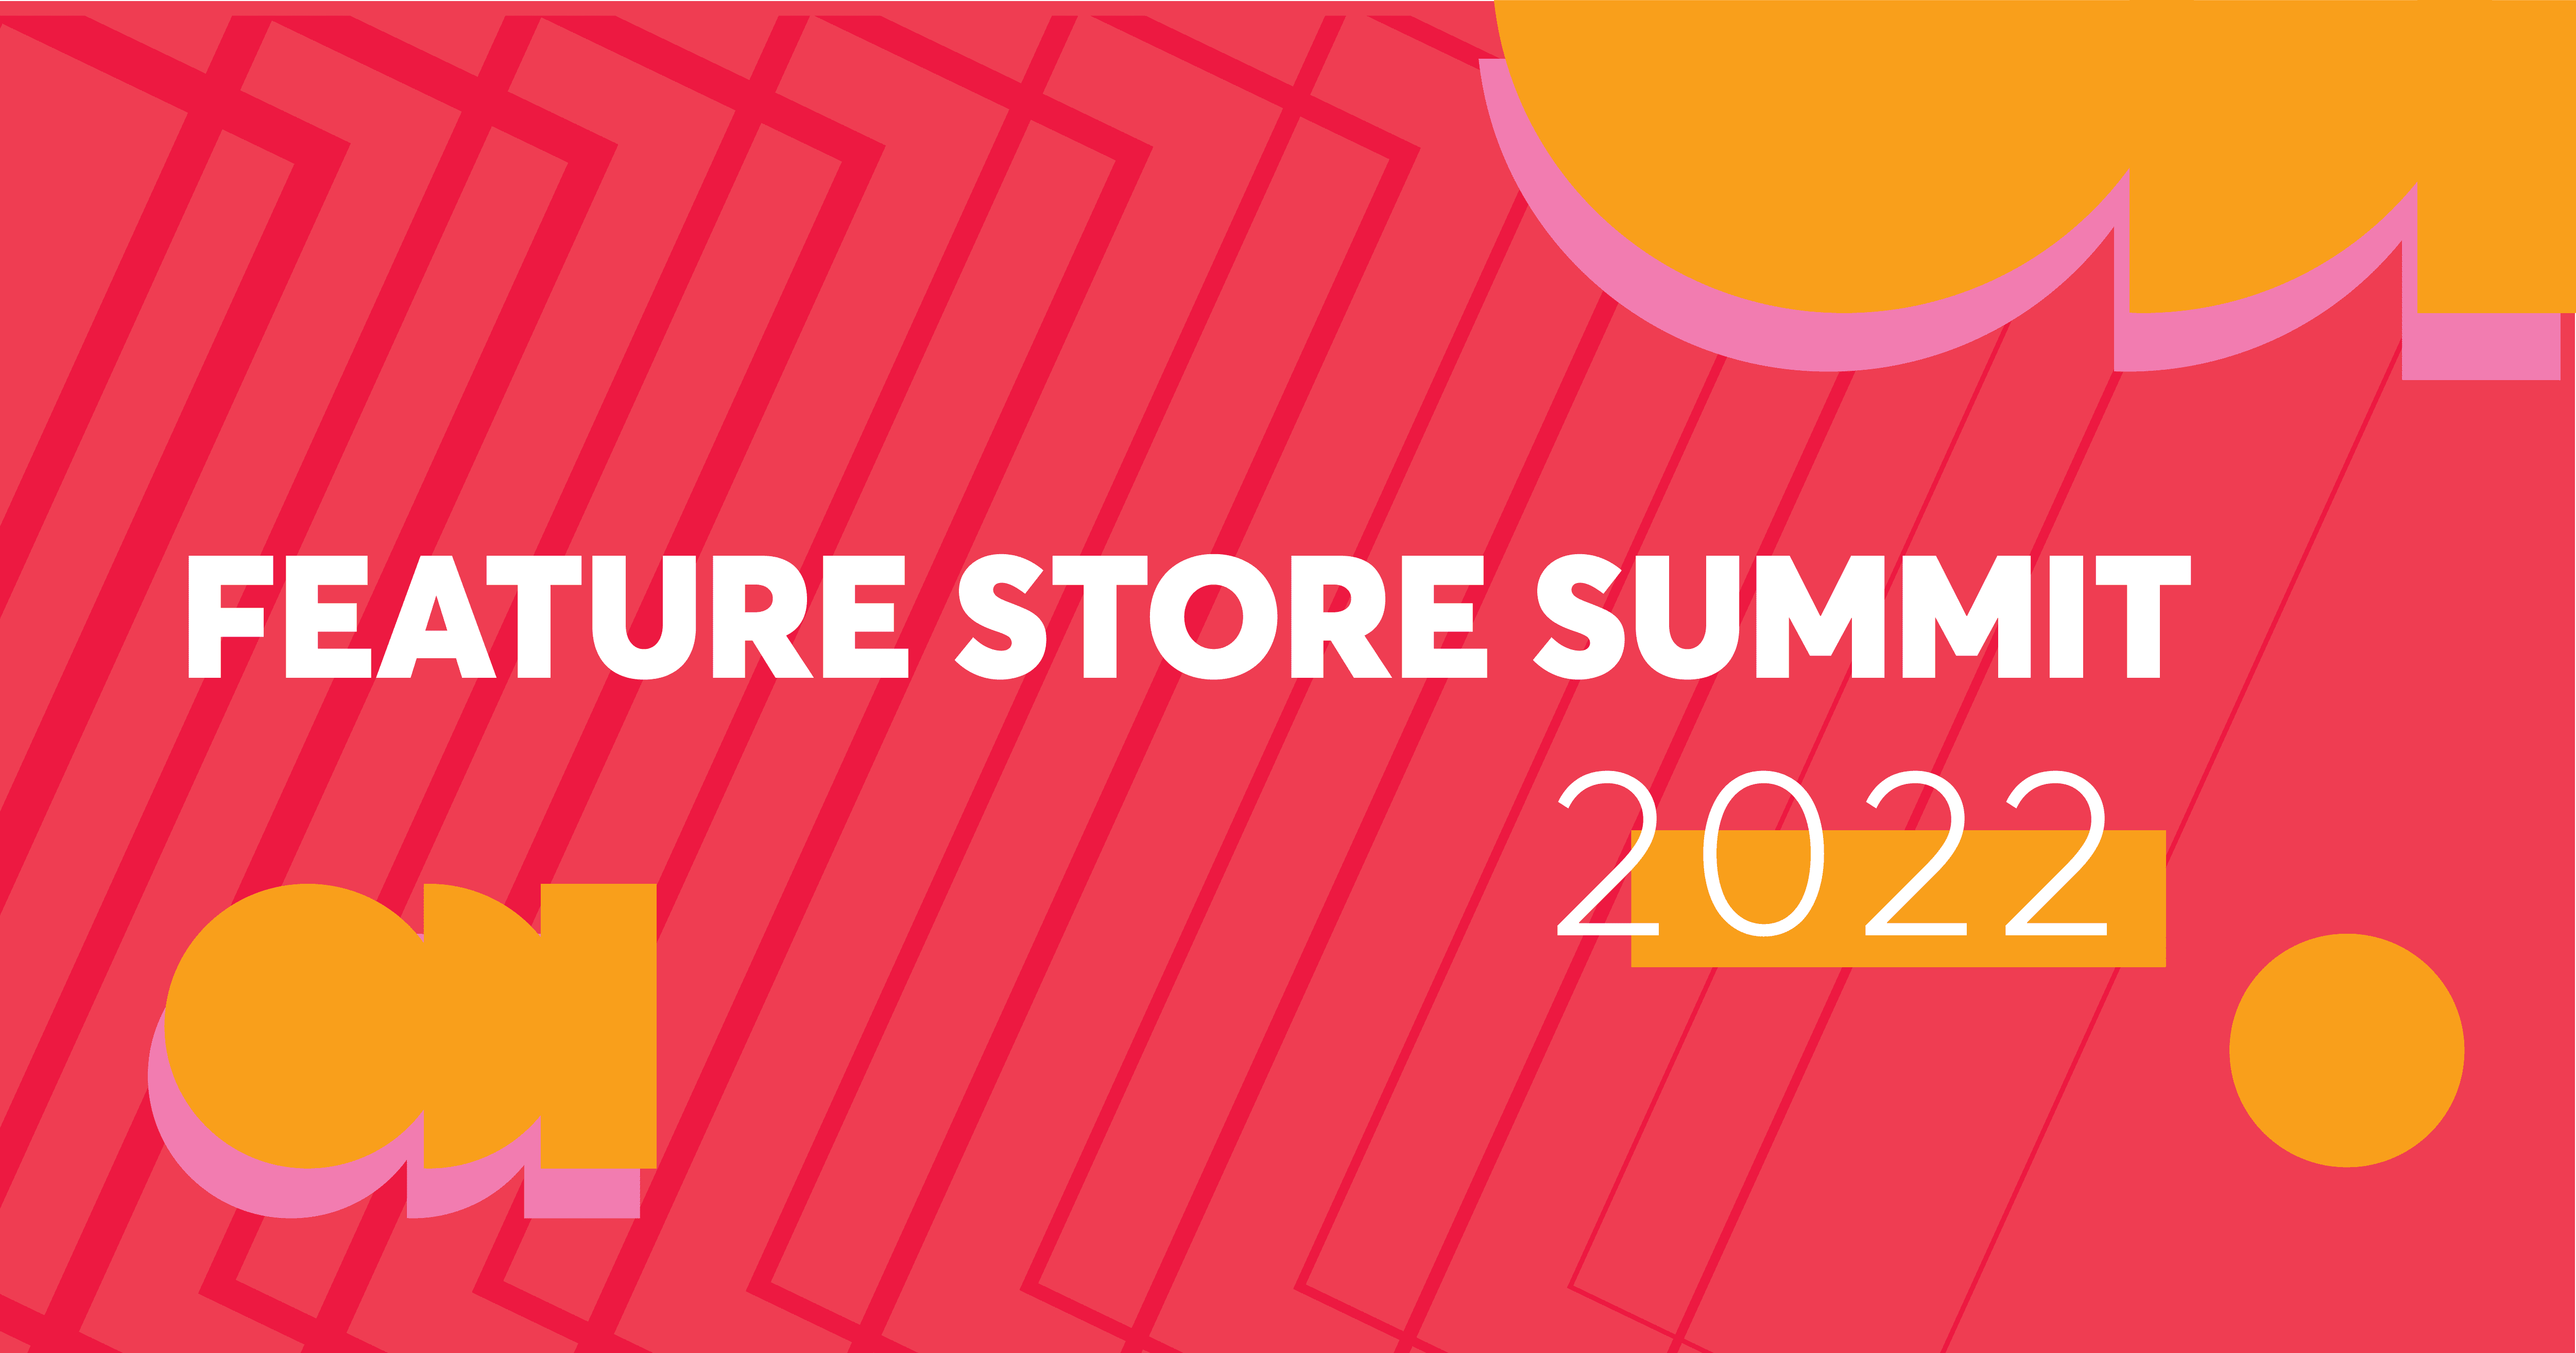 Feature Store Summit 2022: A free conference on Feature Engineering